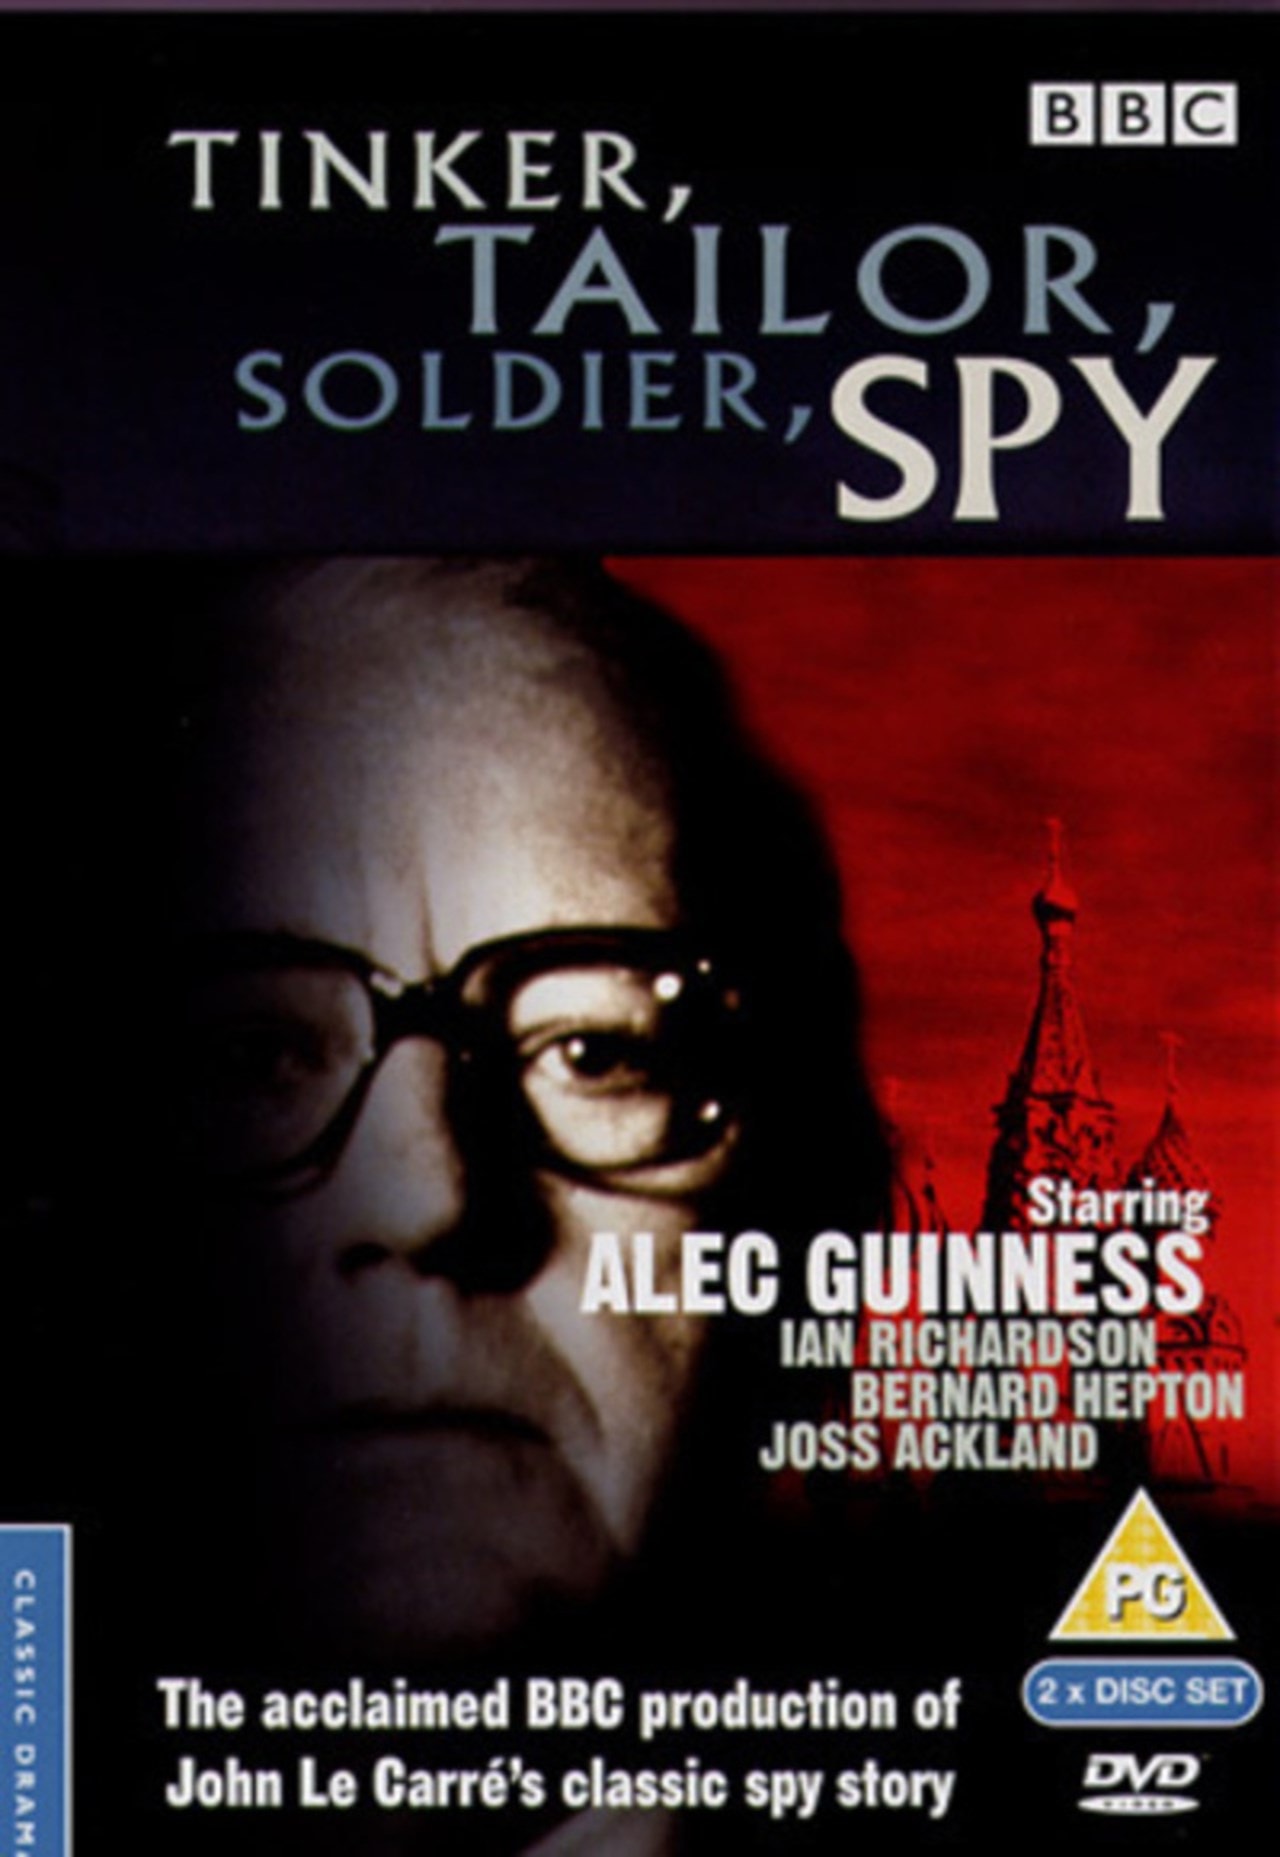 Tinker Tailor Soldier Spy DVD Free shipping over £20 HMV Store